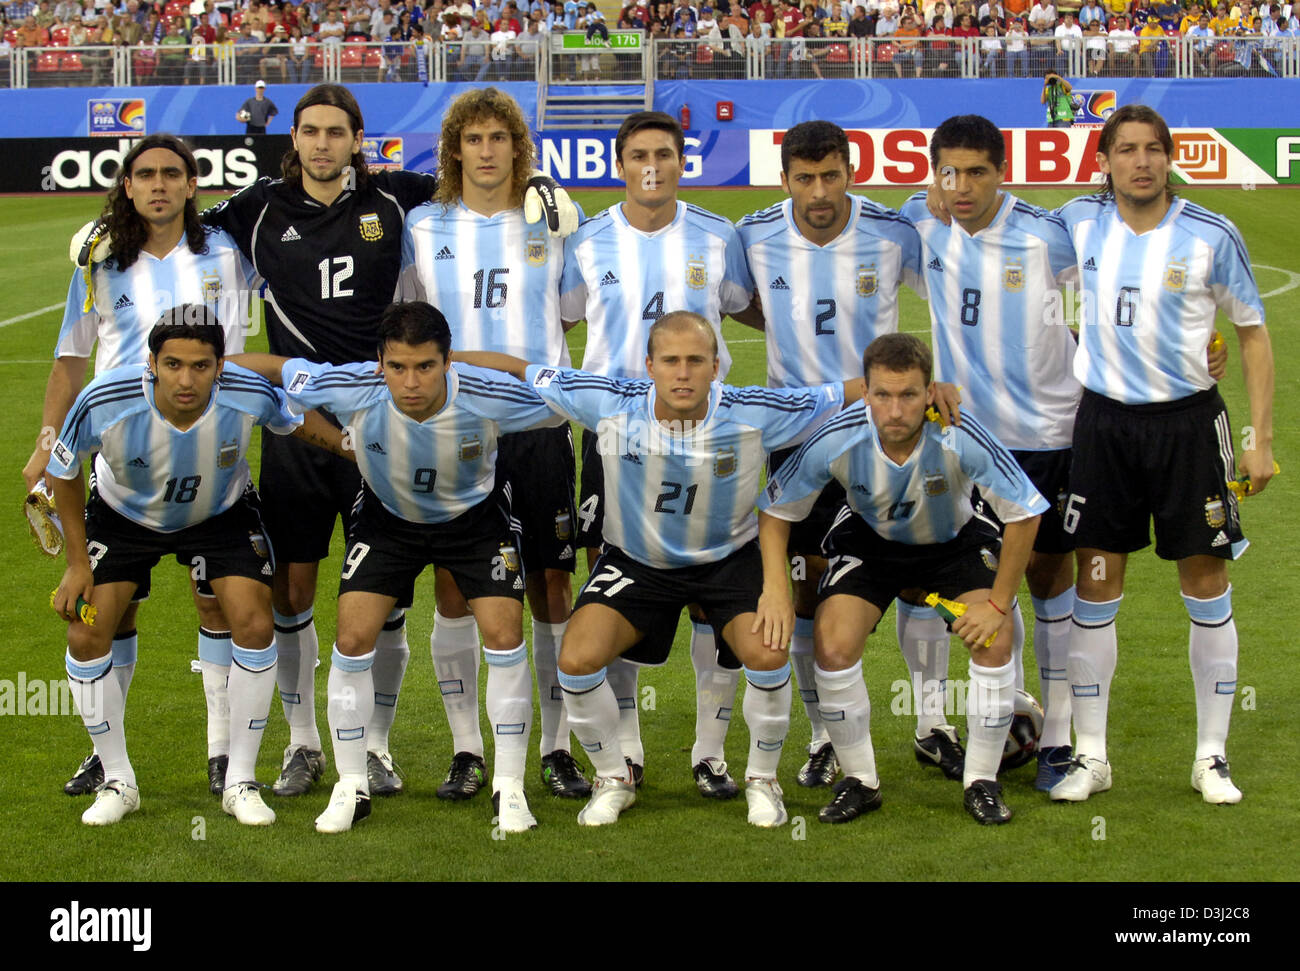 (dpa) - The players of the Argentinian national soccer team: (from L, front) Mario Santana, Javier Saviola, Luciano Figueroa, Lucas Bernardi; (from L, back)  Juan Sorin, German Lux, Fabricio Coloccini, Javier Zanetti, Walter Samuel, Juan Riquelme and Gabriel Heinze pose for a team picture prior to the group A match of the Confederations Cup tournament Australia vs Argentina at the  Stock Photo